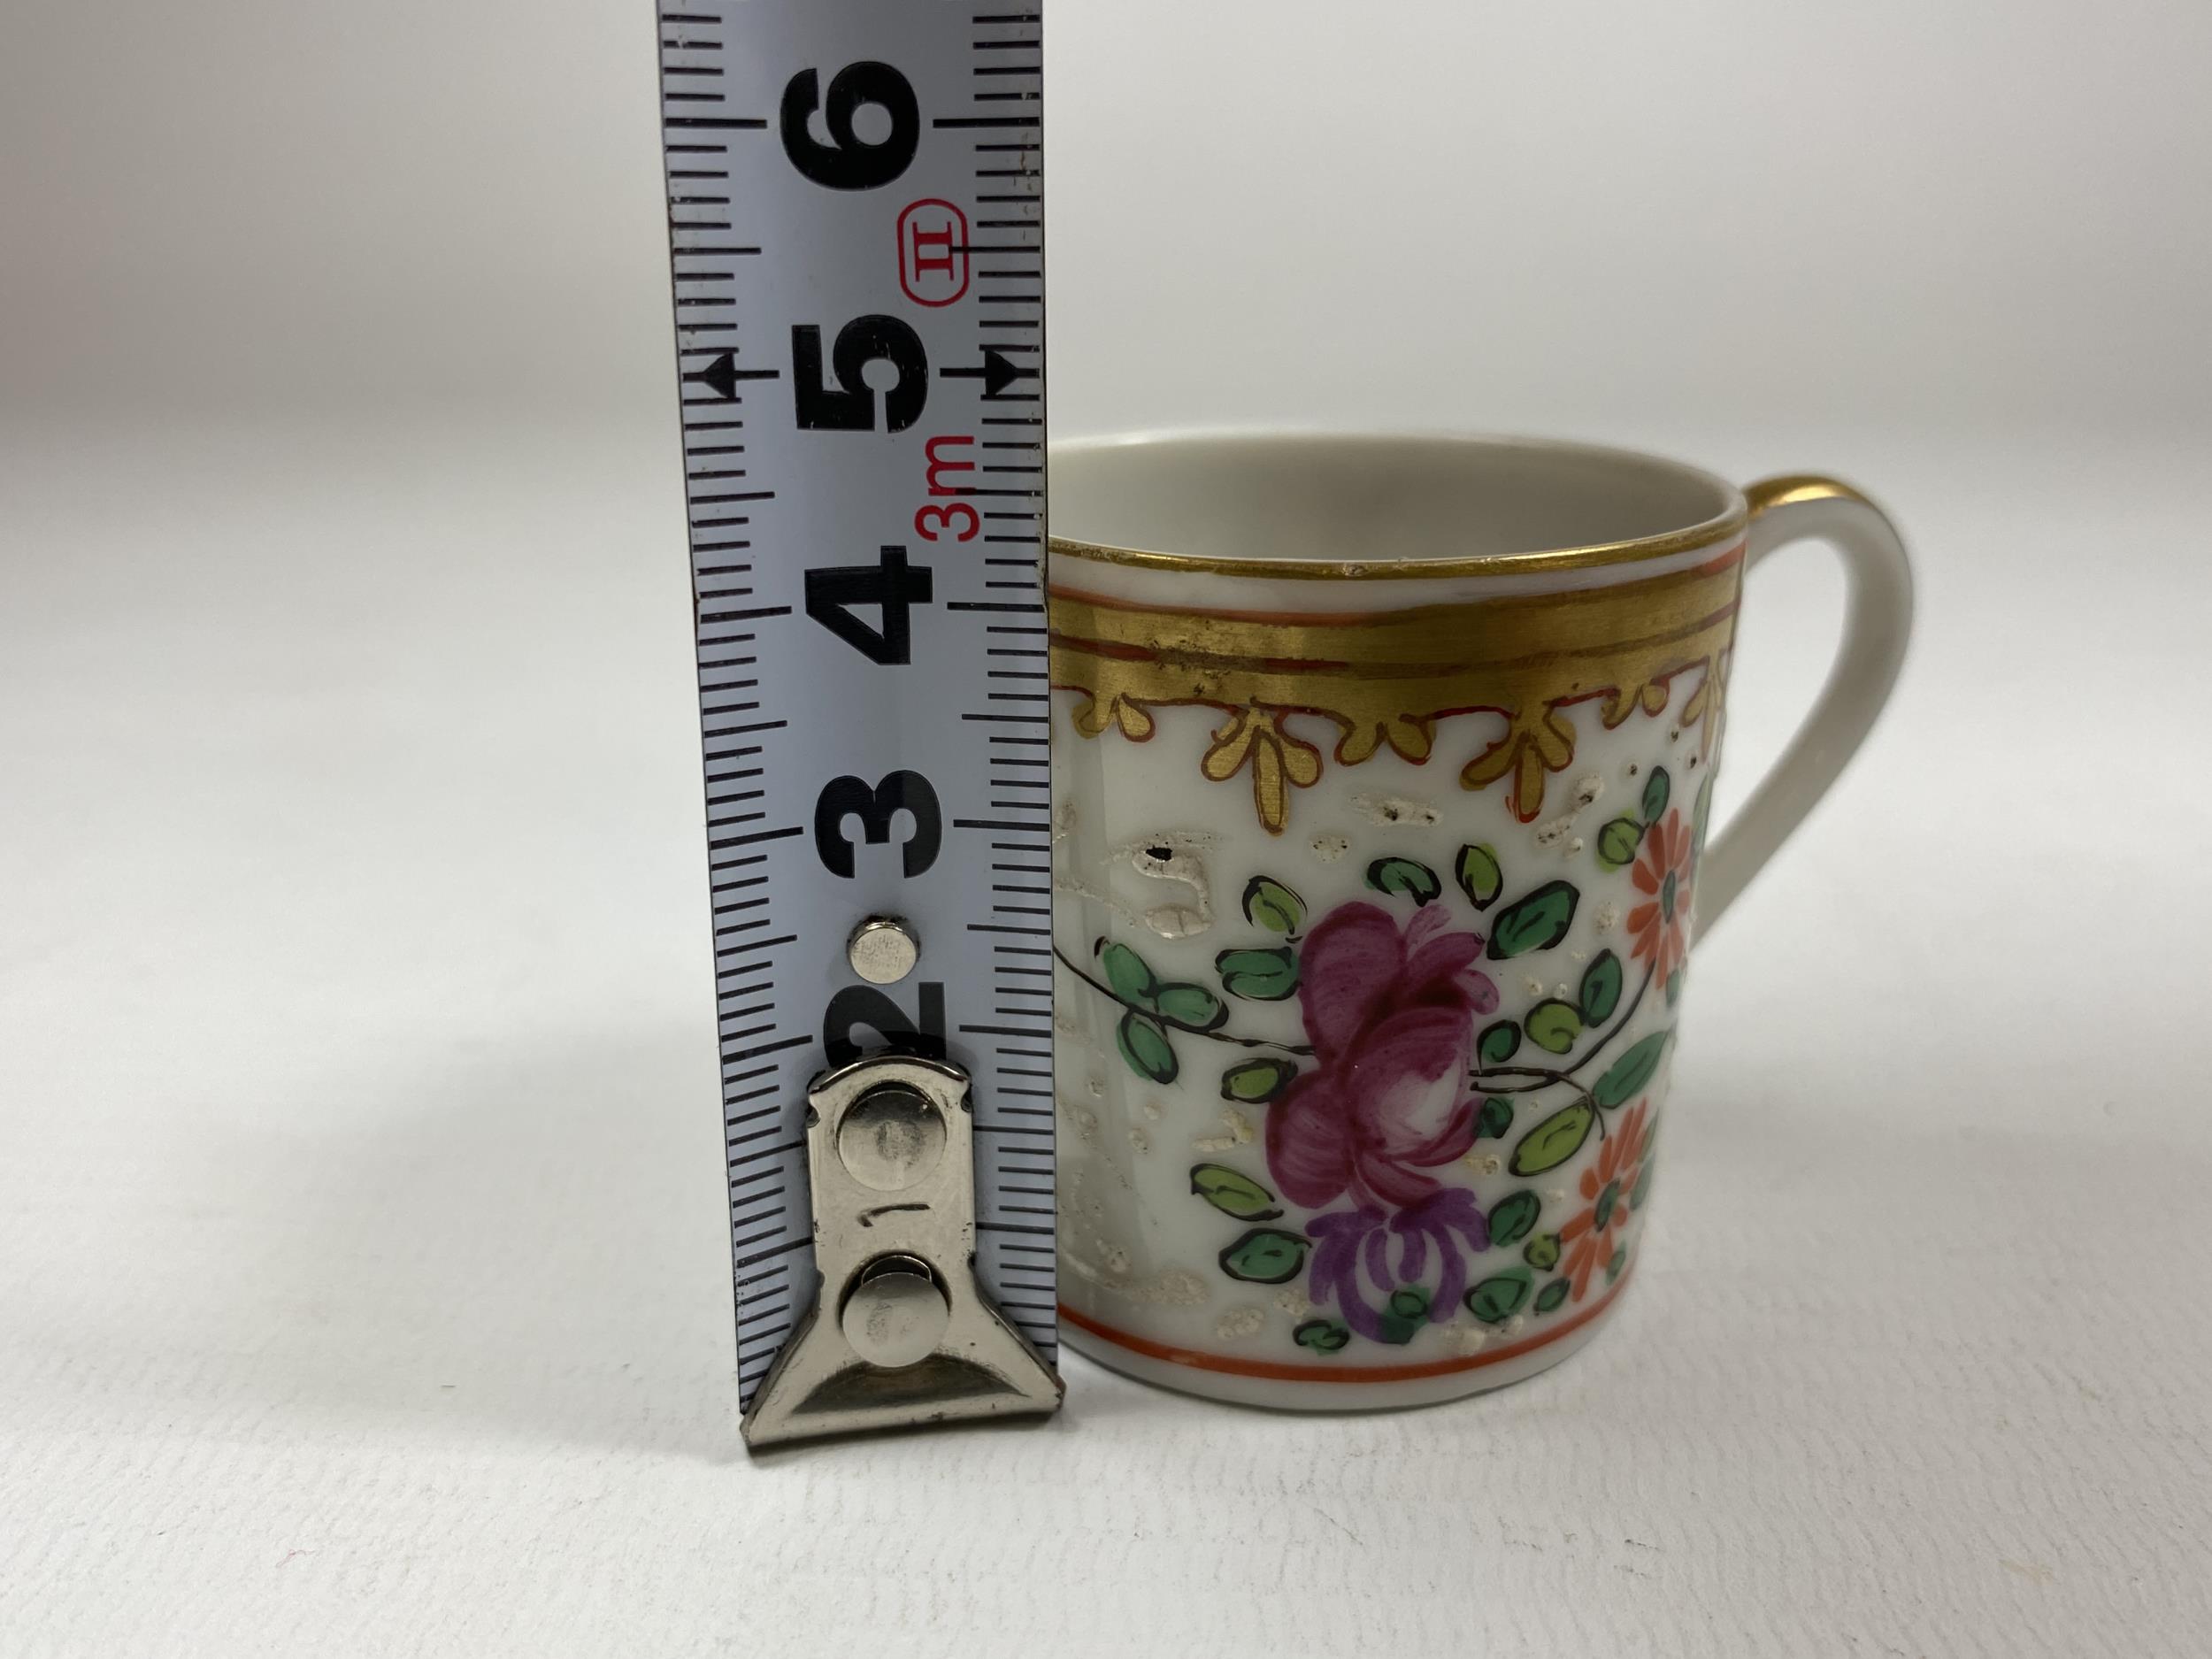 A MINIATURE 19TH CENTURY CHINESE EXPORT PORCELAIN TANKARD, HEIGHT 4CM - Image 4 of 4